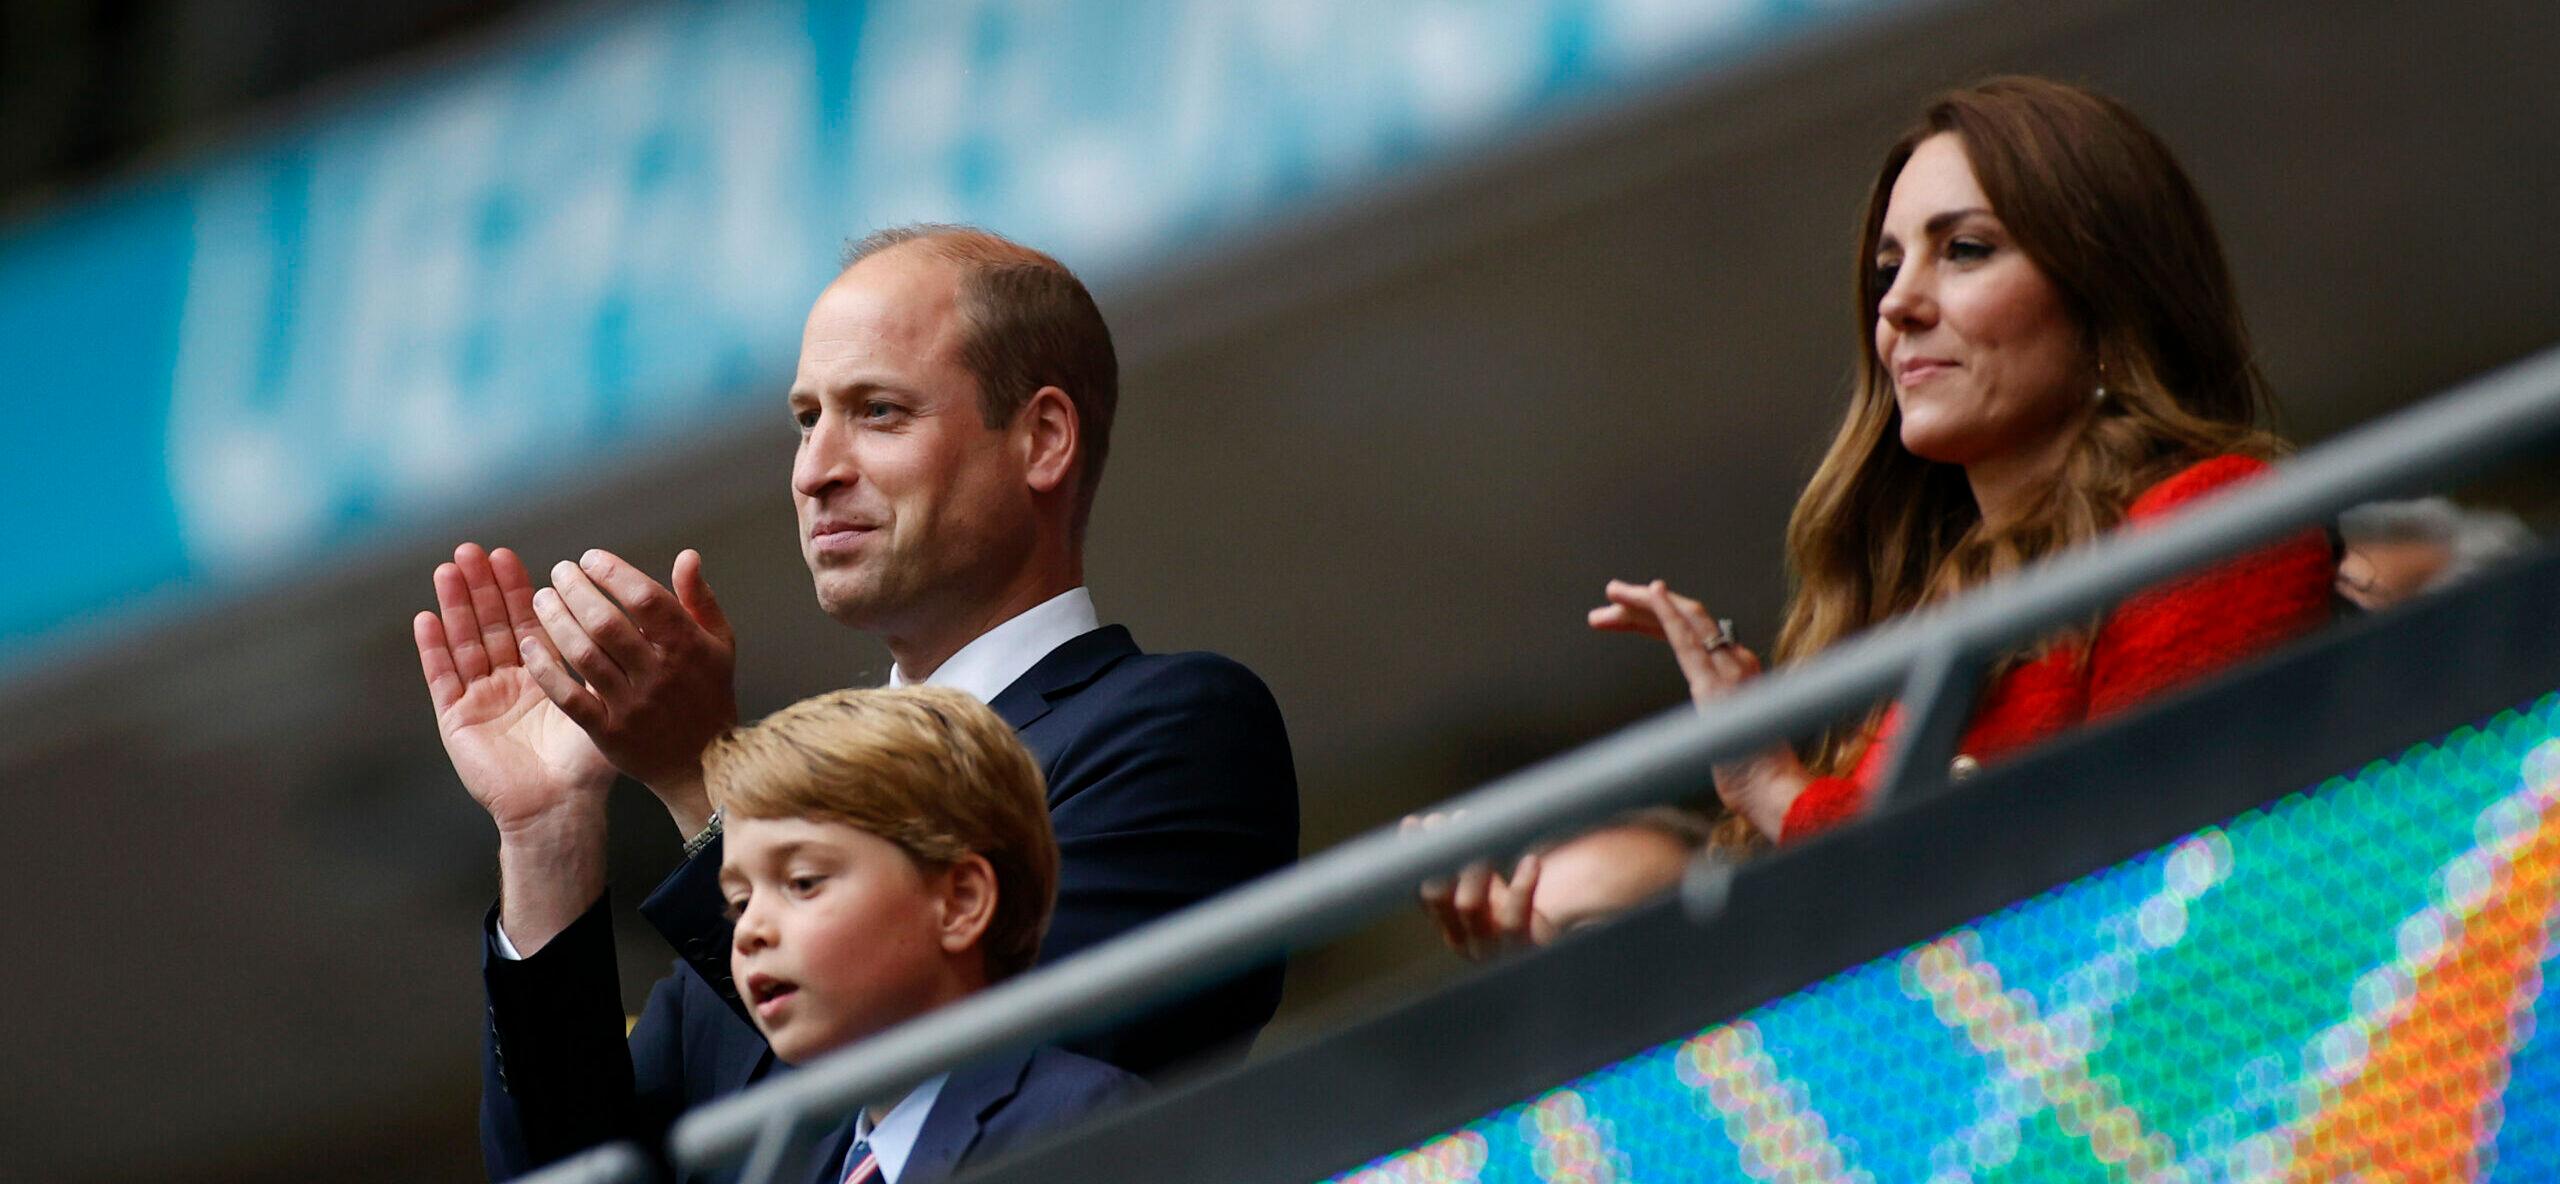 Twinning Is Winning! Prince William & Prince George Wear Matching Suits To Soccer Match